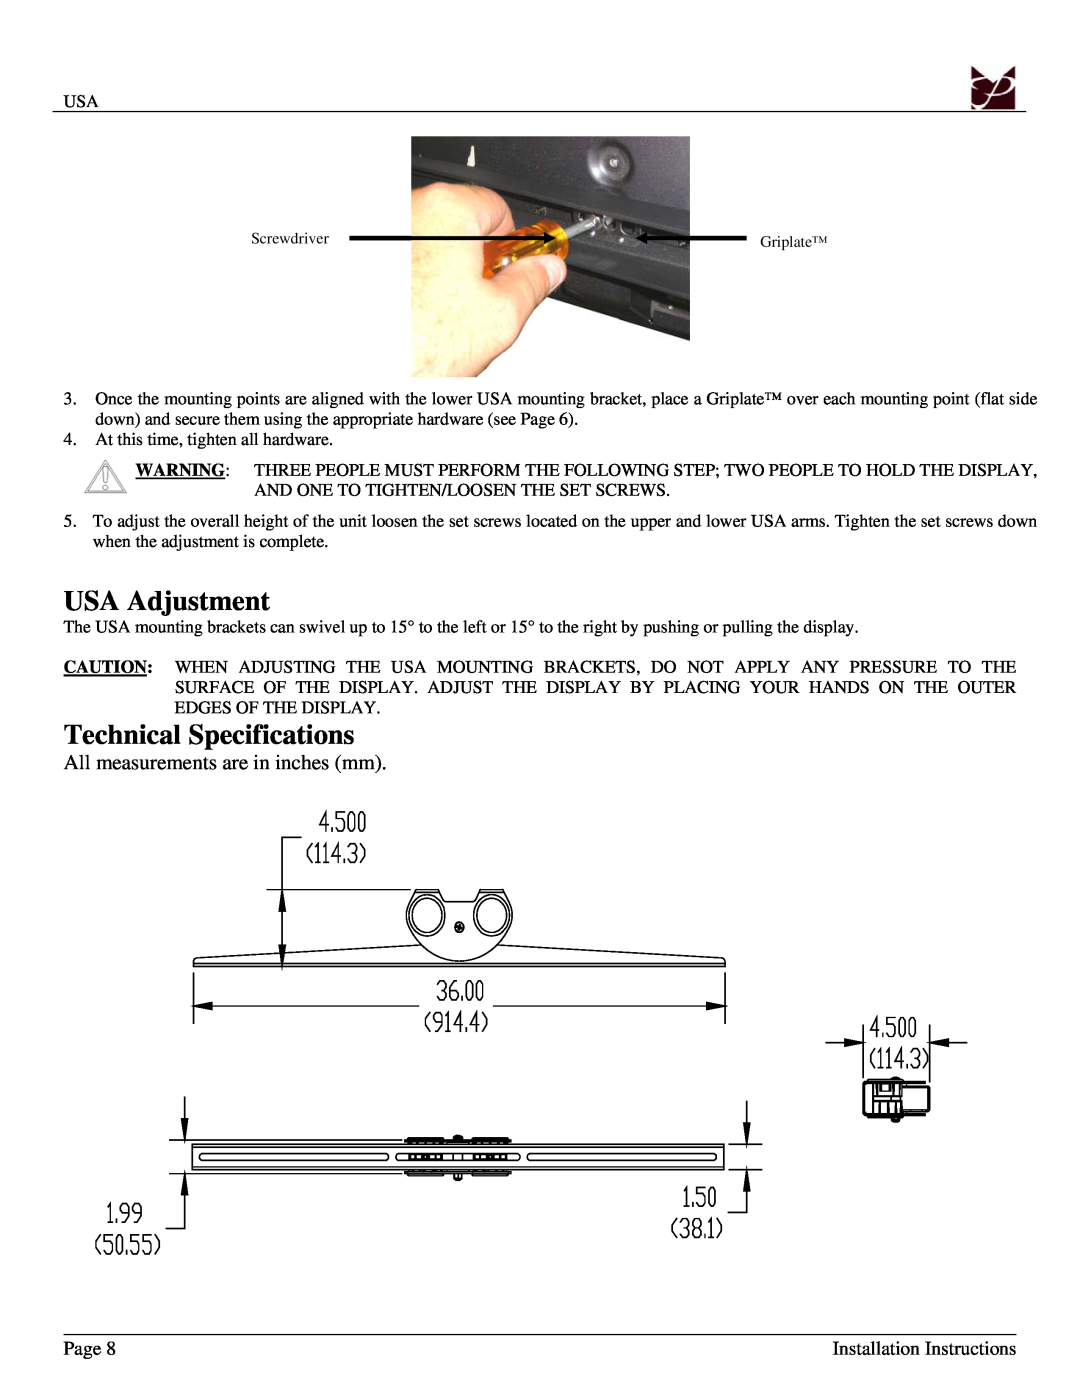 Premier Mounts installation manual USA Adjustment, Technical Specifications, All measurements are in inches mm, Page 